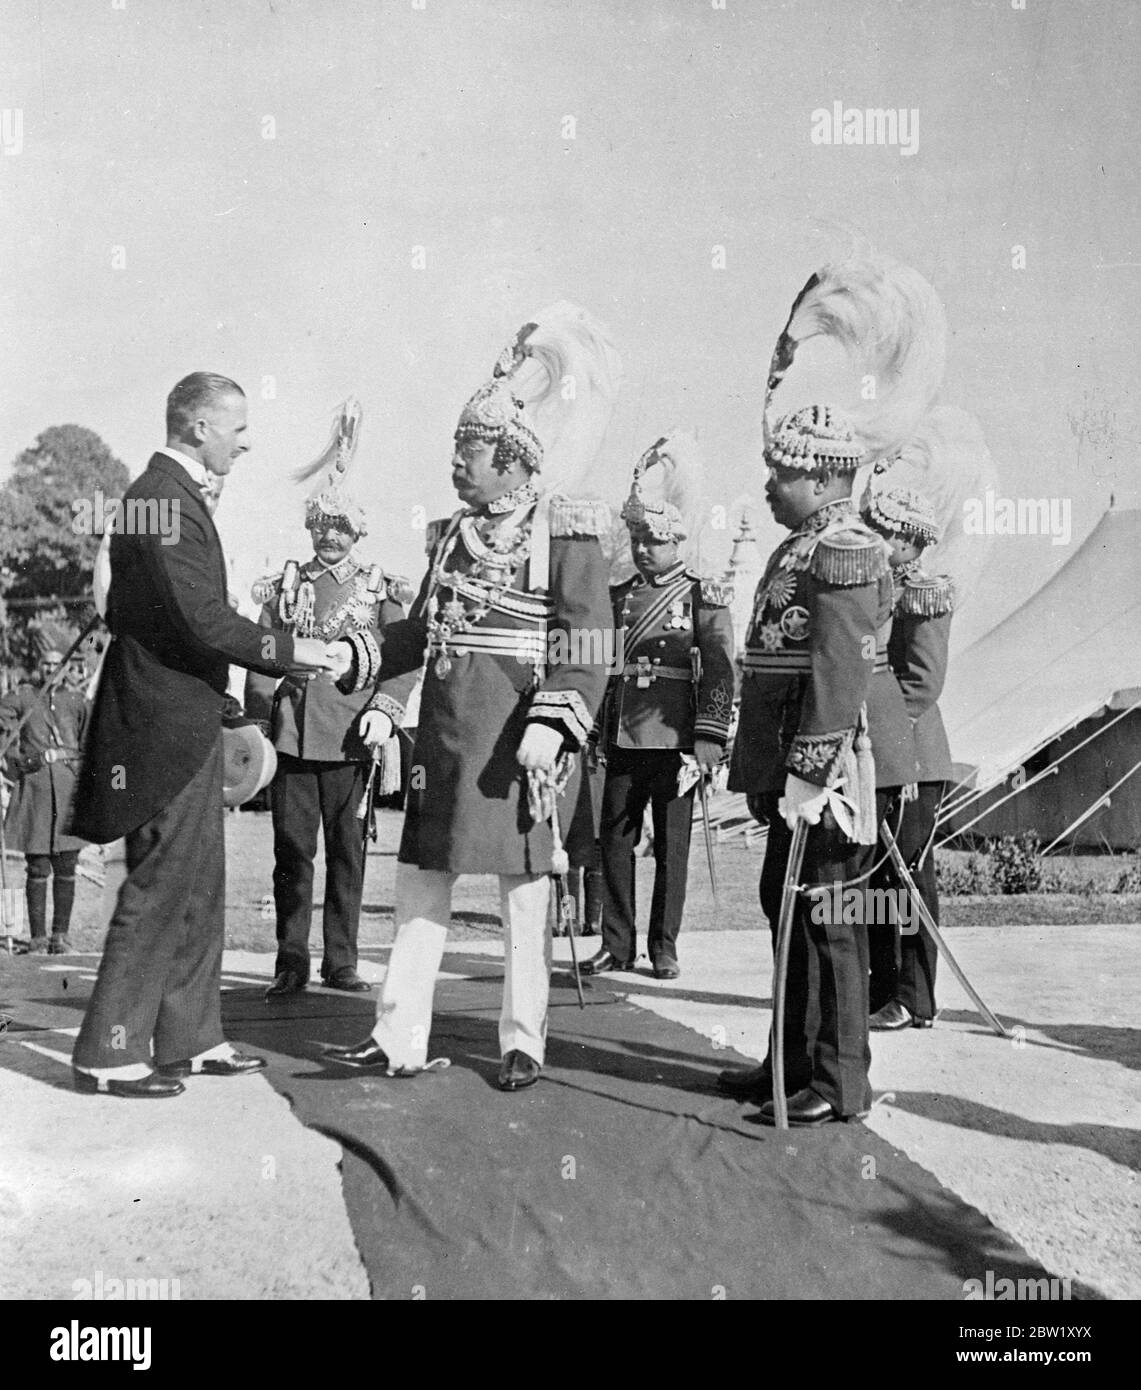 Exclusive pictures of the silver jubilee of the King of Nepal. These exclusive pictures illustrate the celebrations which took place in connection with the silver jubilee of the Trubhubana Bis Vikram Sah, 31-year-old King of Nepal, who came to the throne in 1911. The whole capital put on Gala attire and tens of thousands of subjects watched the parade of jewelled elephants and the entire army in review. These pictures were taken by special invitation in the capital, Kathmandu. Photo shows, the Prime Minister, Sir Joodha Shumshere Jung Bahadur Rana, greeted by Mr R Kilburn, only European in the Stock Photo